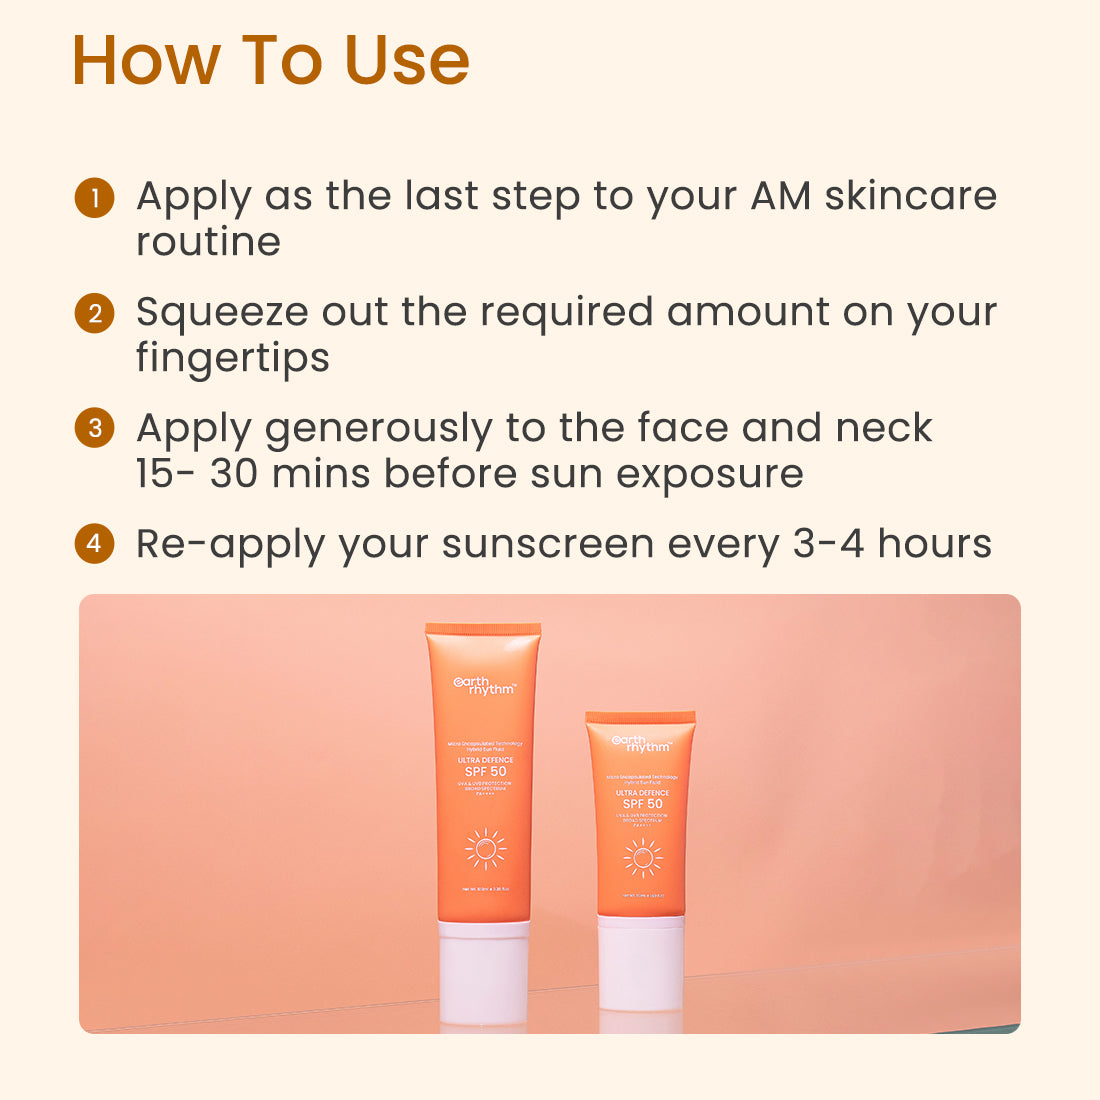 How to use SPF 50 Sunscreen